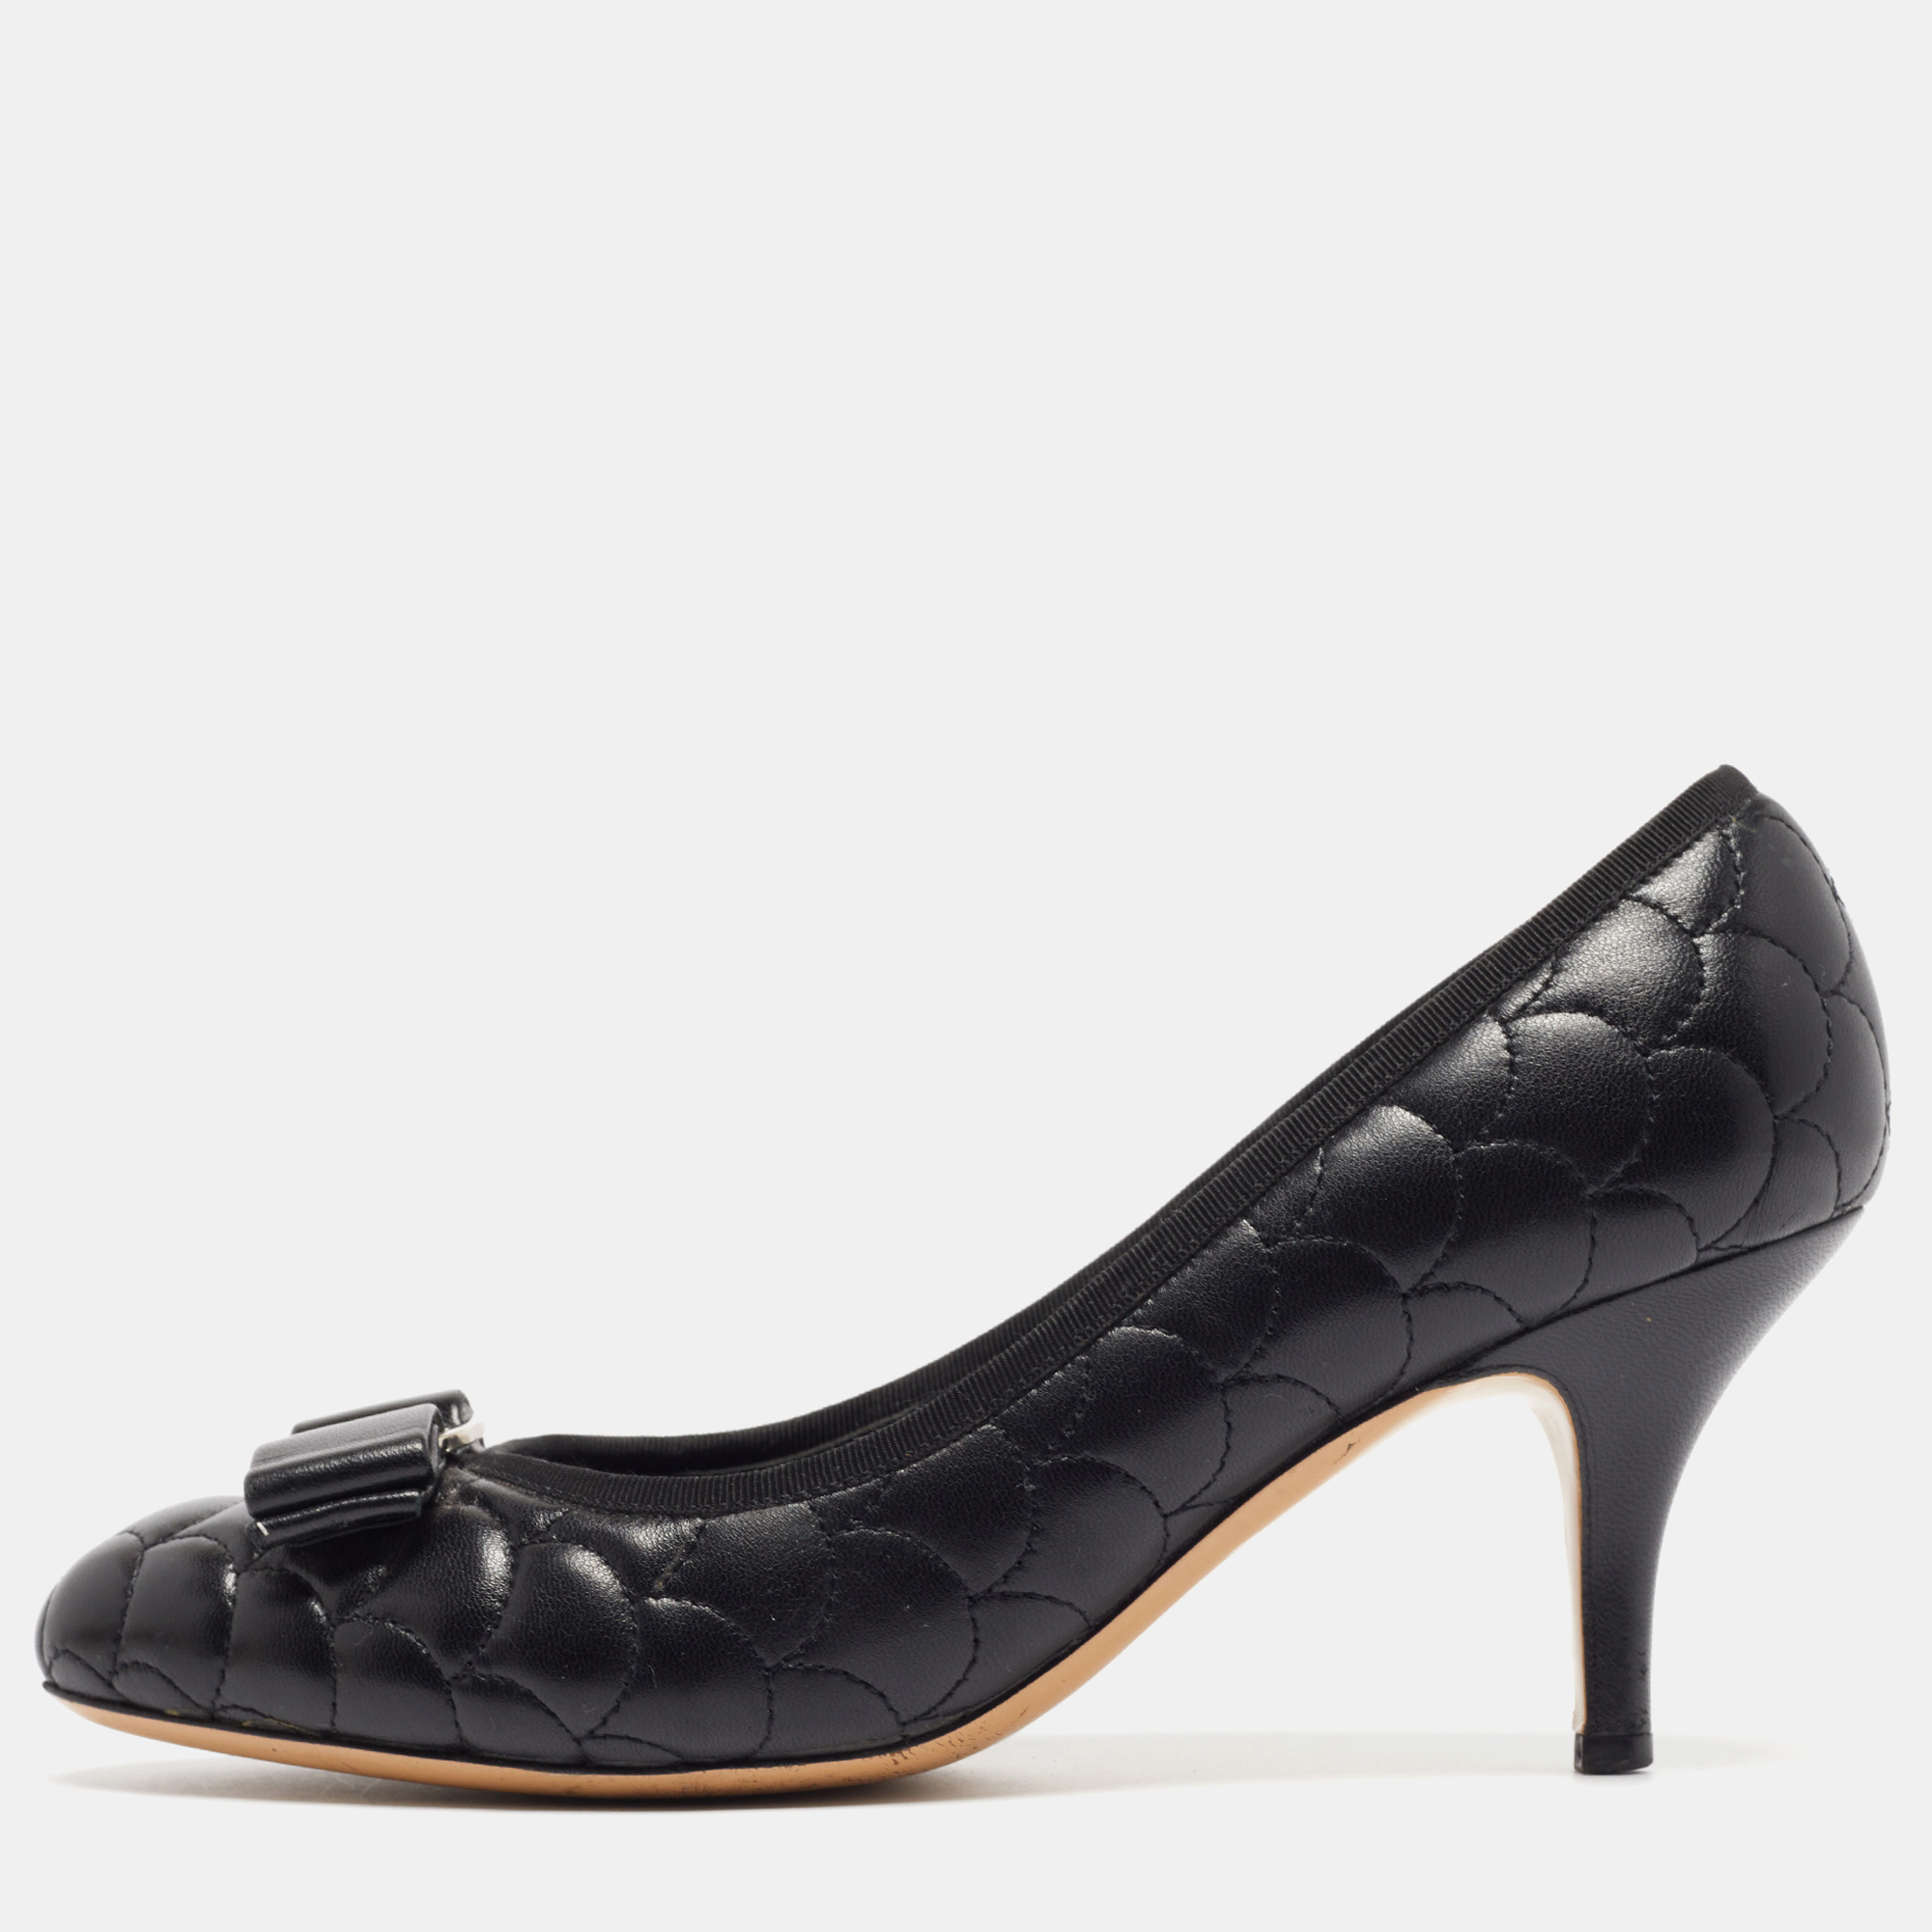 Salvatore ferragamo black quilted leather bow pumps size 36.5